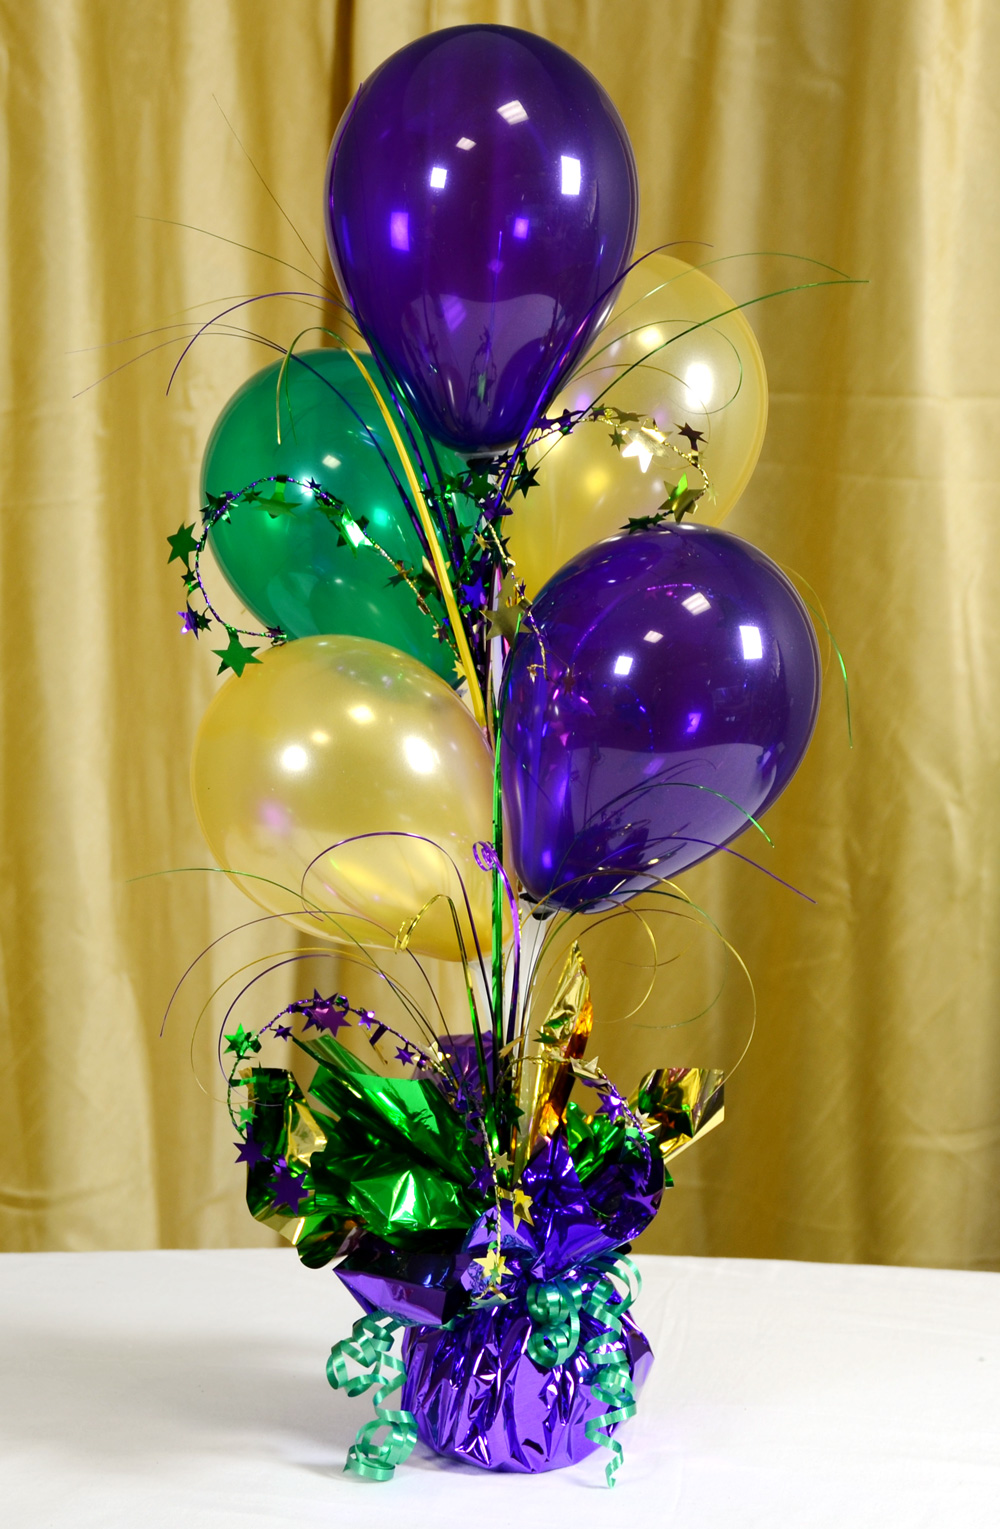 Party Ideas by Mardi Gras Outlet: Air-filled Balloon Centerpieces 